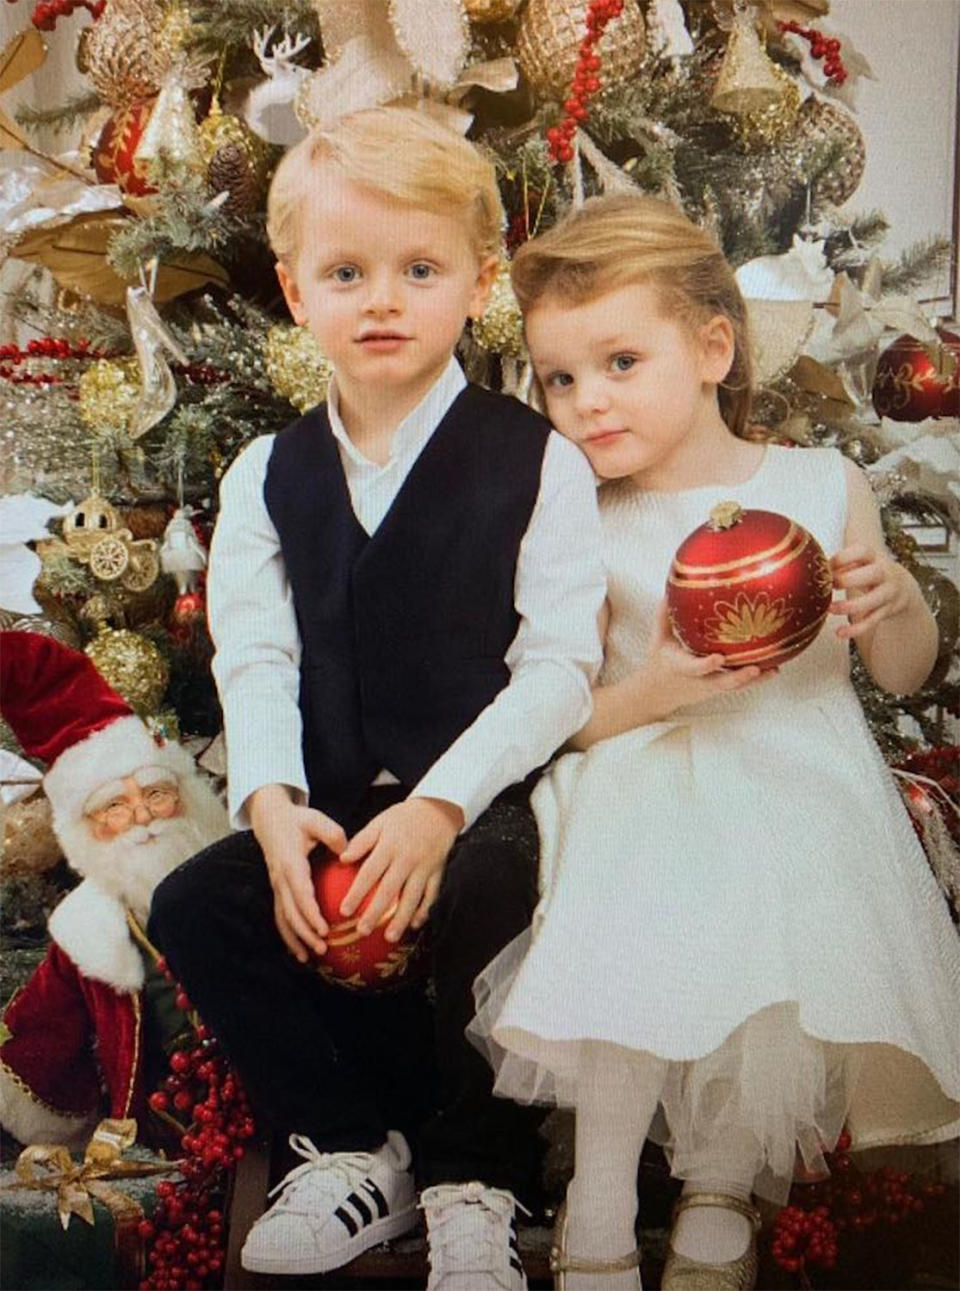 Monaco Twins Jacques and Gabriella Star in Christmas Portrait